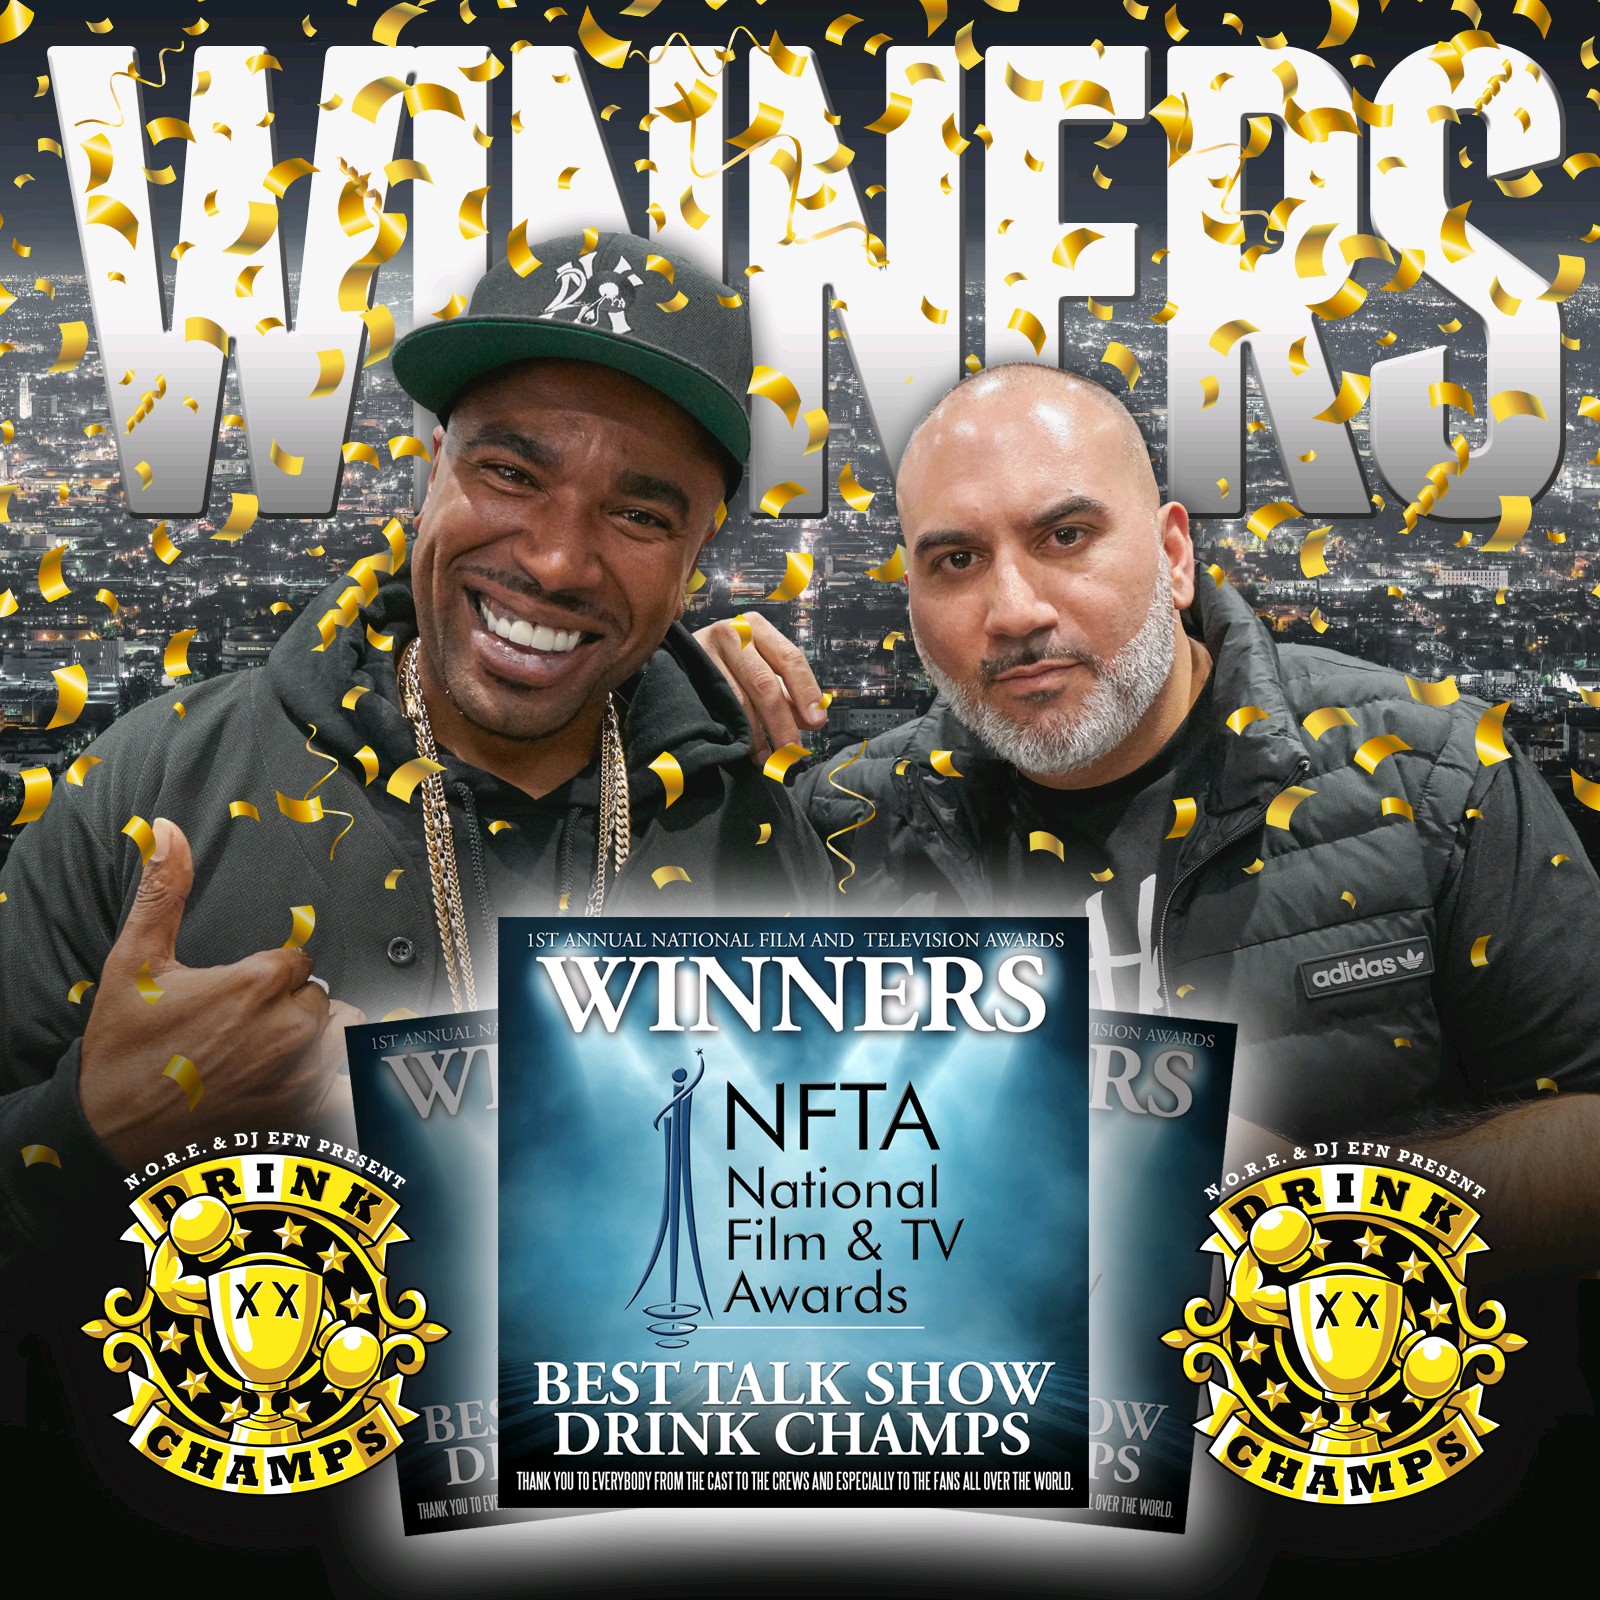 DRINK CHAMPS Win "BEST TALK SHOW" at the National Film & TV Awards